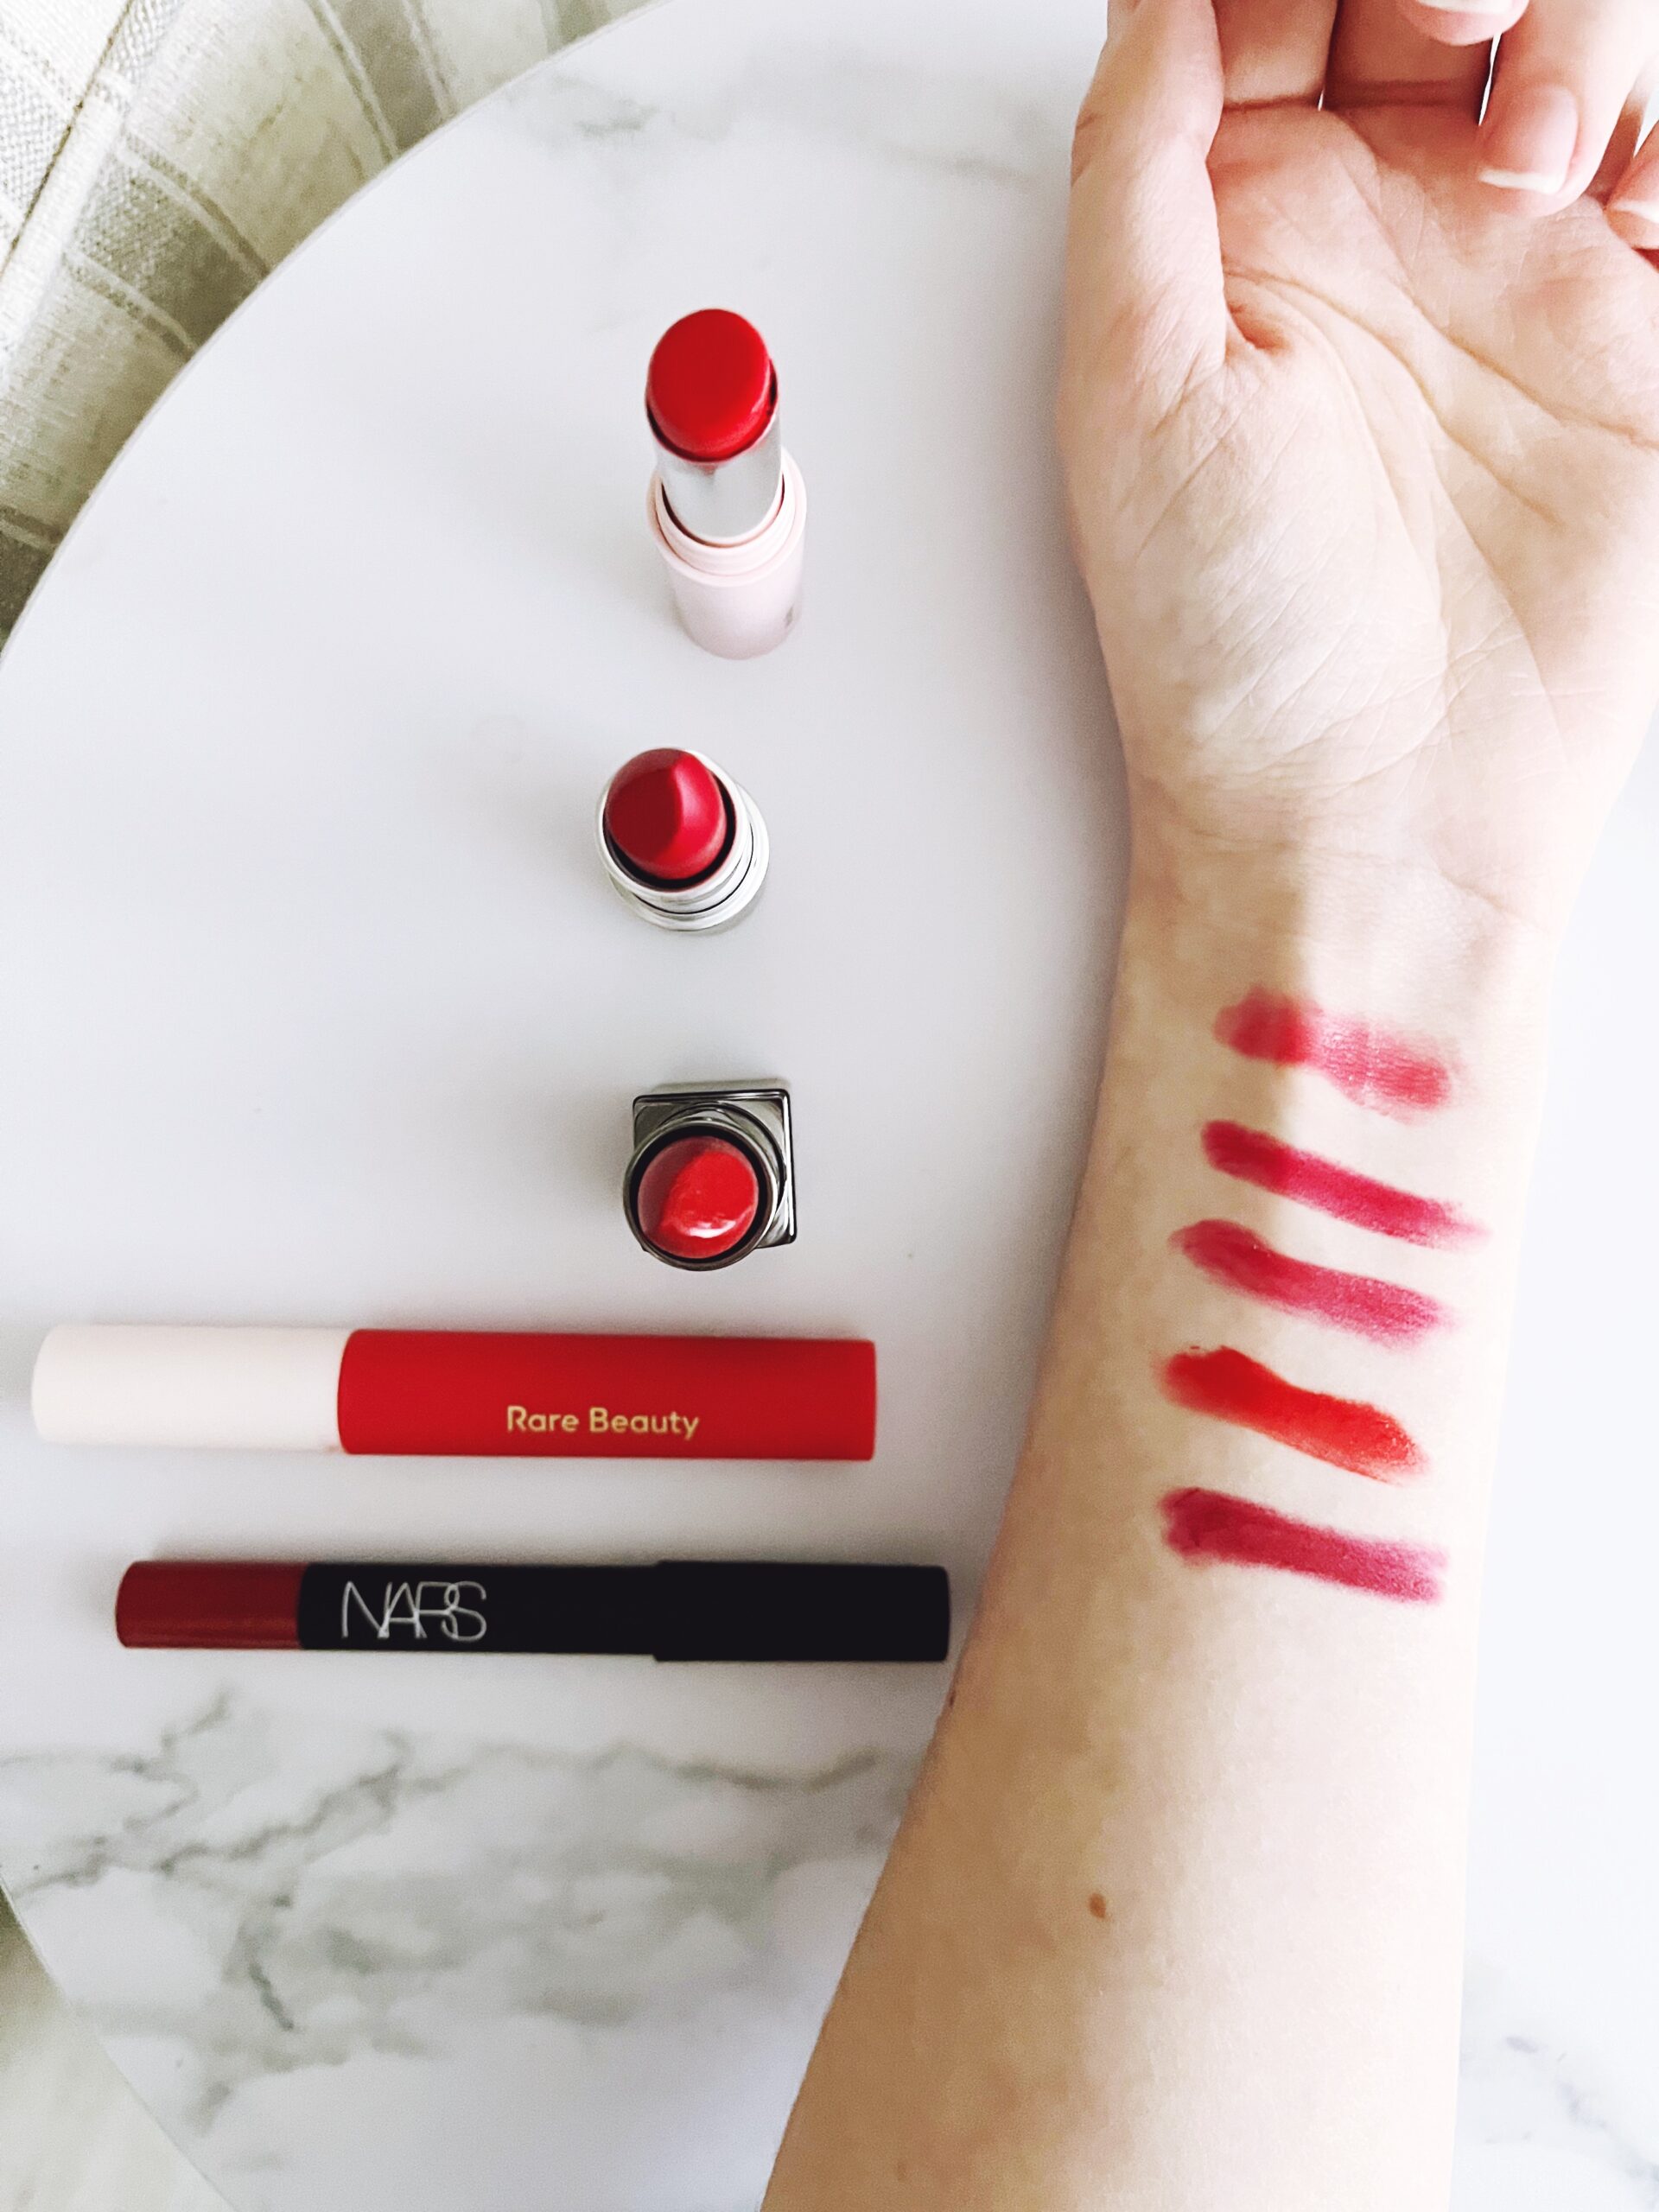 Swatches of red lipsticks of fair, cool-toned skin